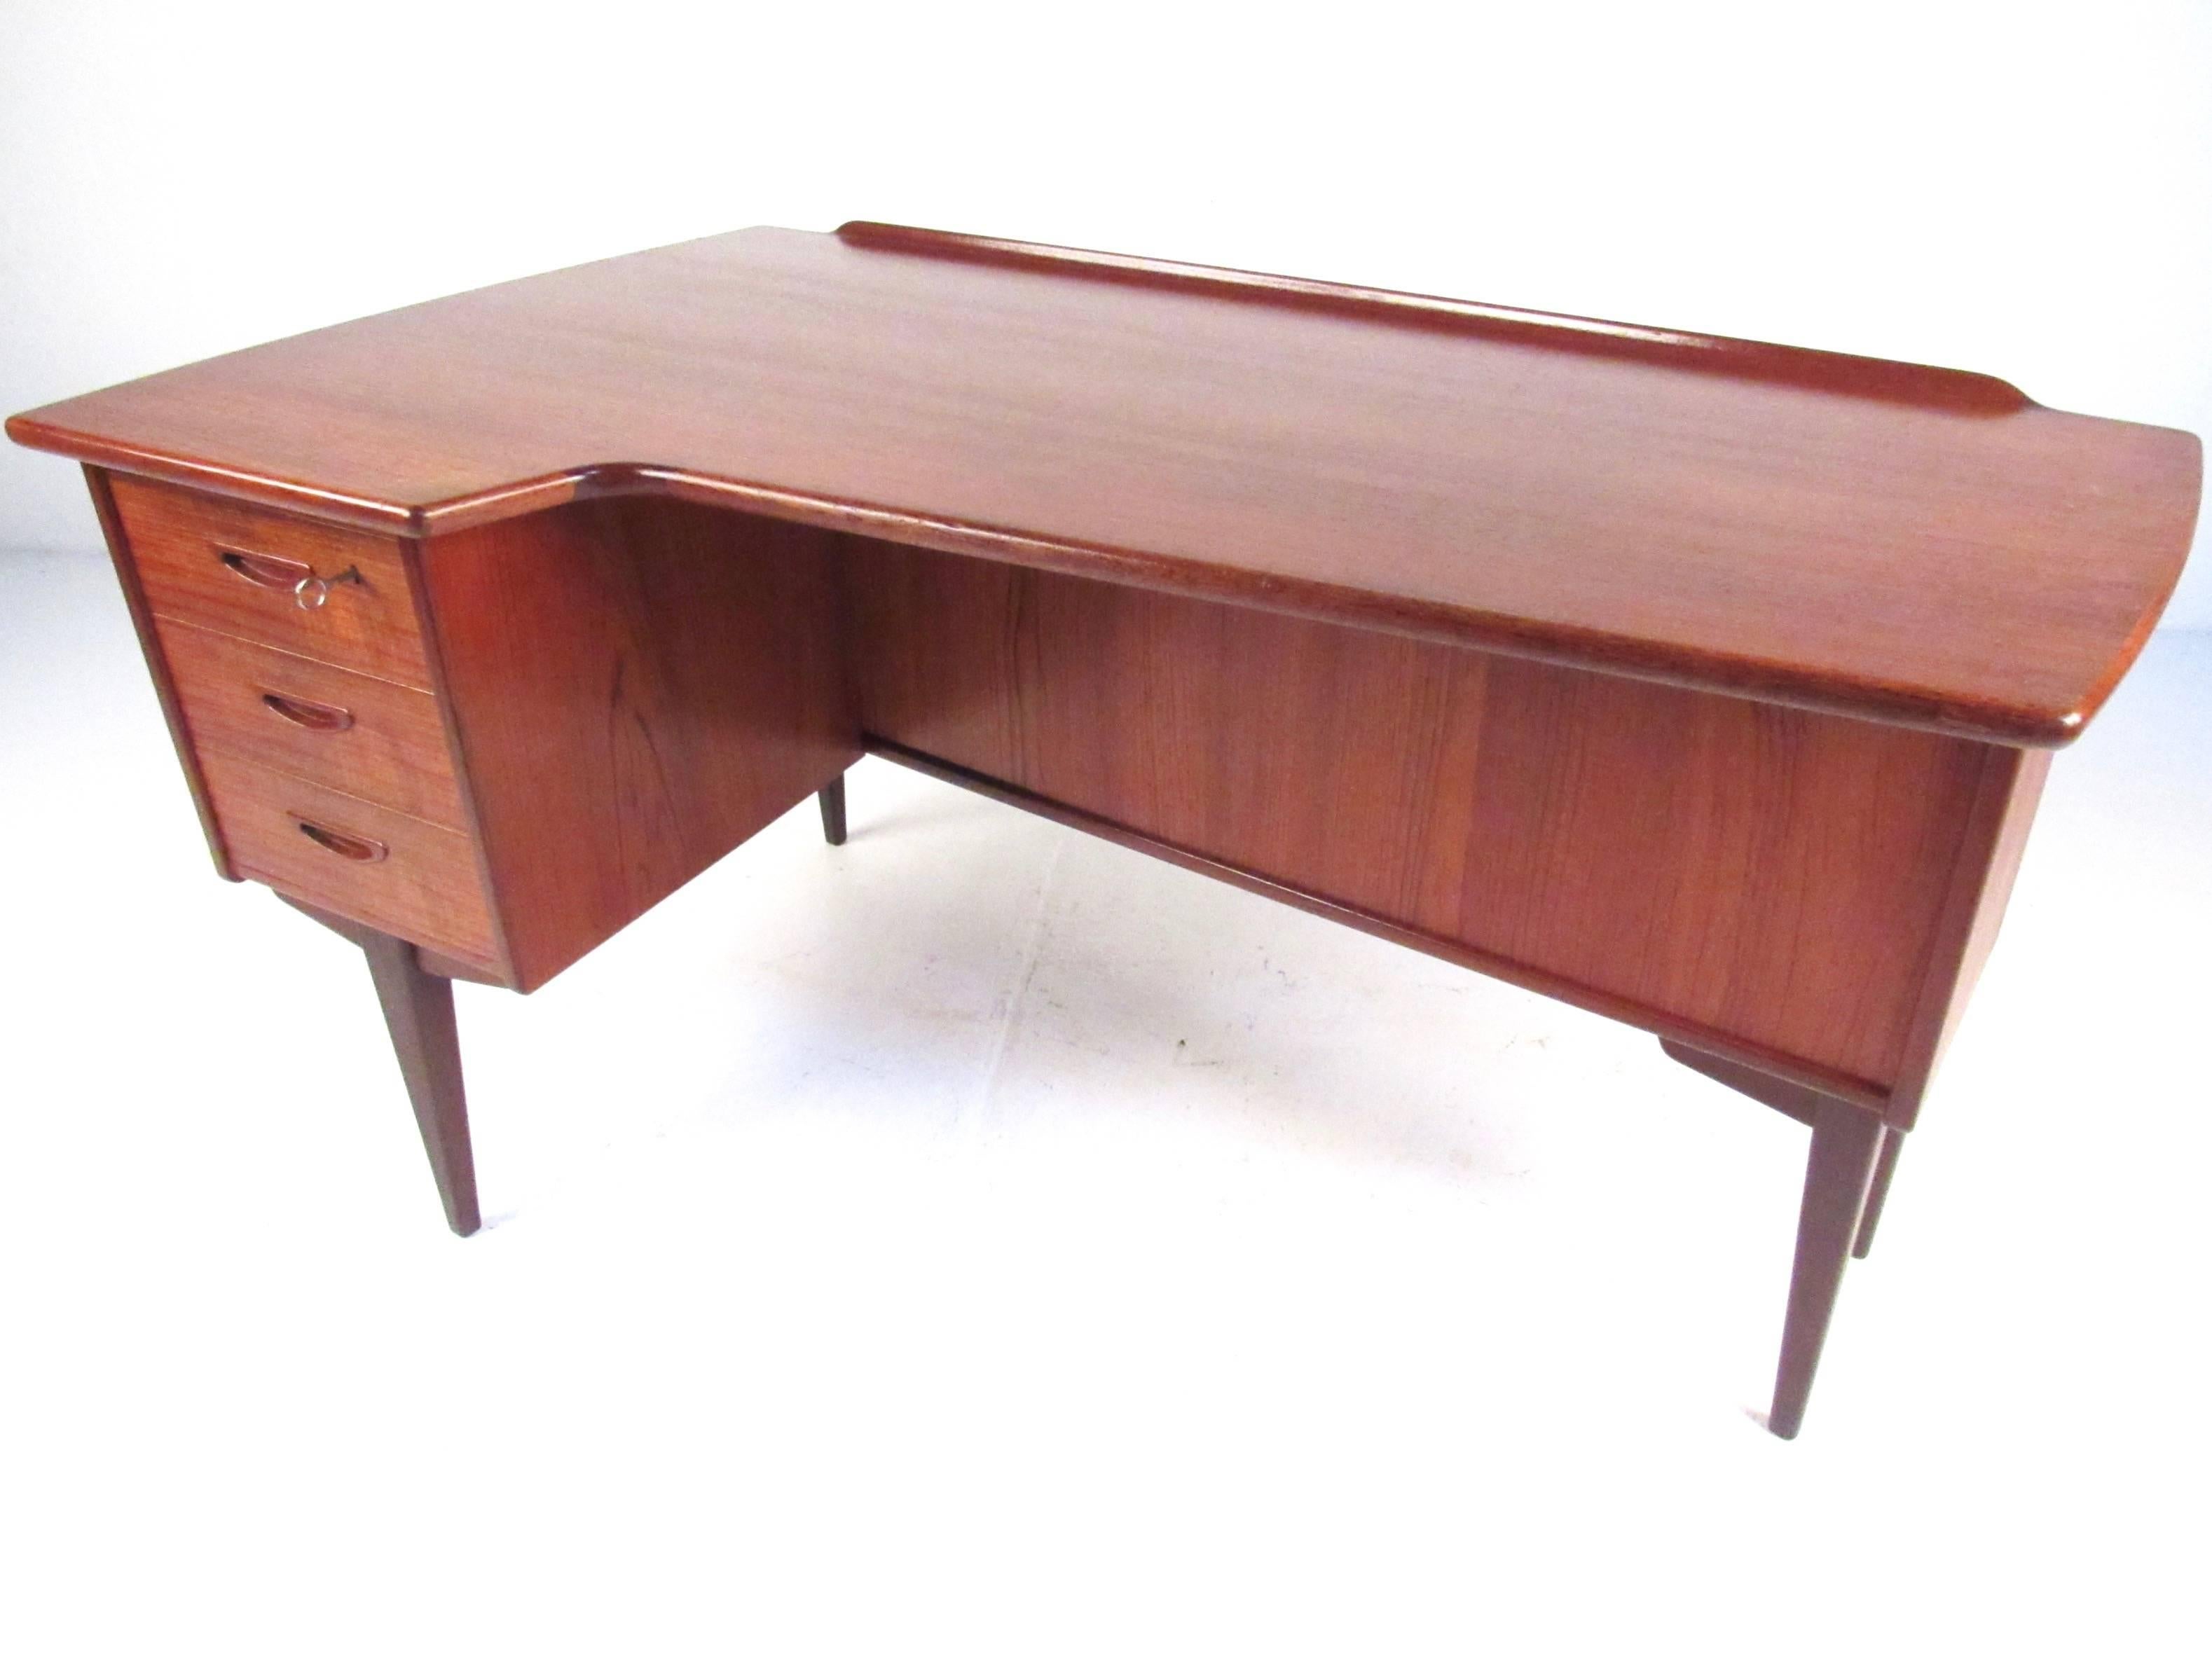 This stylish Mid-Century Danish teak desk by Peter Lovig Nielsen features a rich vintage finish, raised back edge, and double sided design. Dovetailed locking drawers, drop down cabinet storage, and tapered legs add to the Scandinavian Modern design